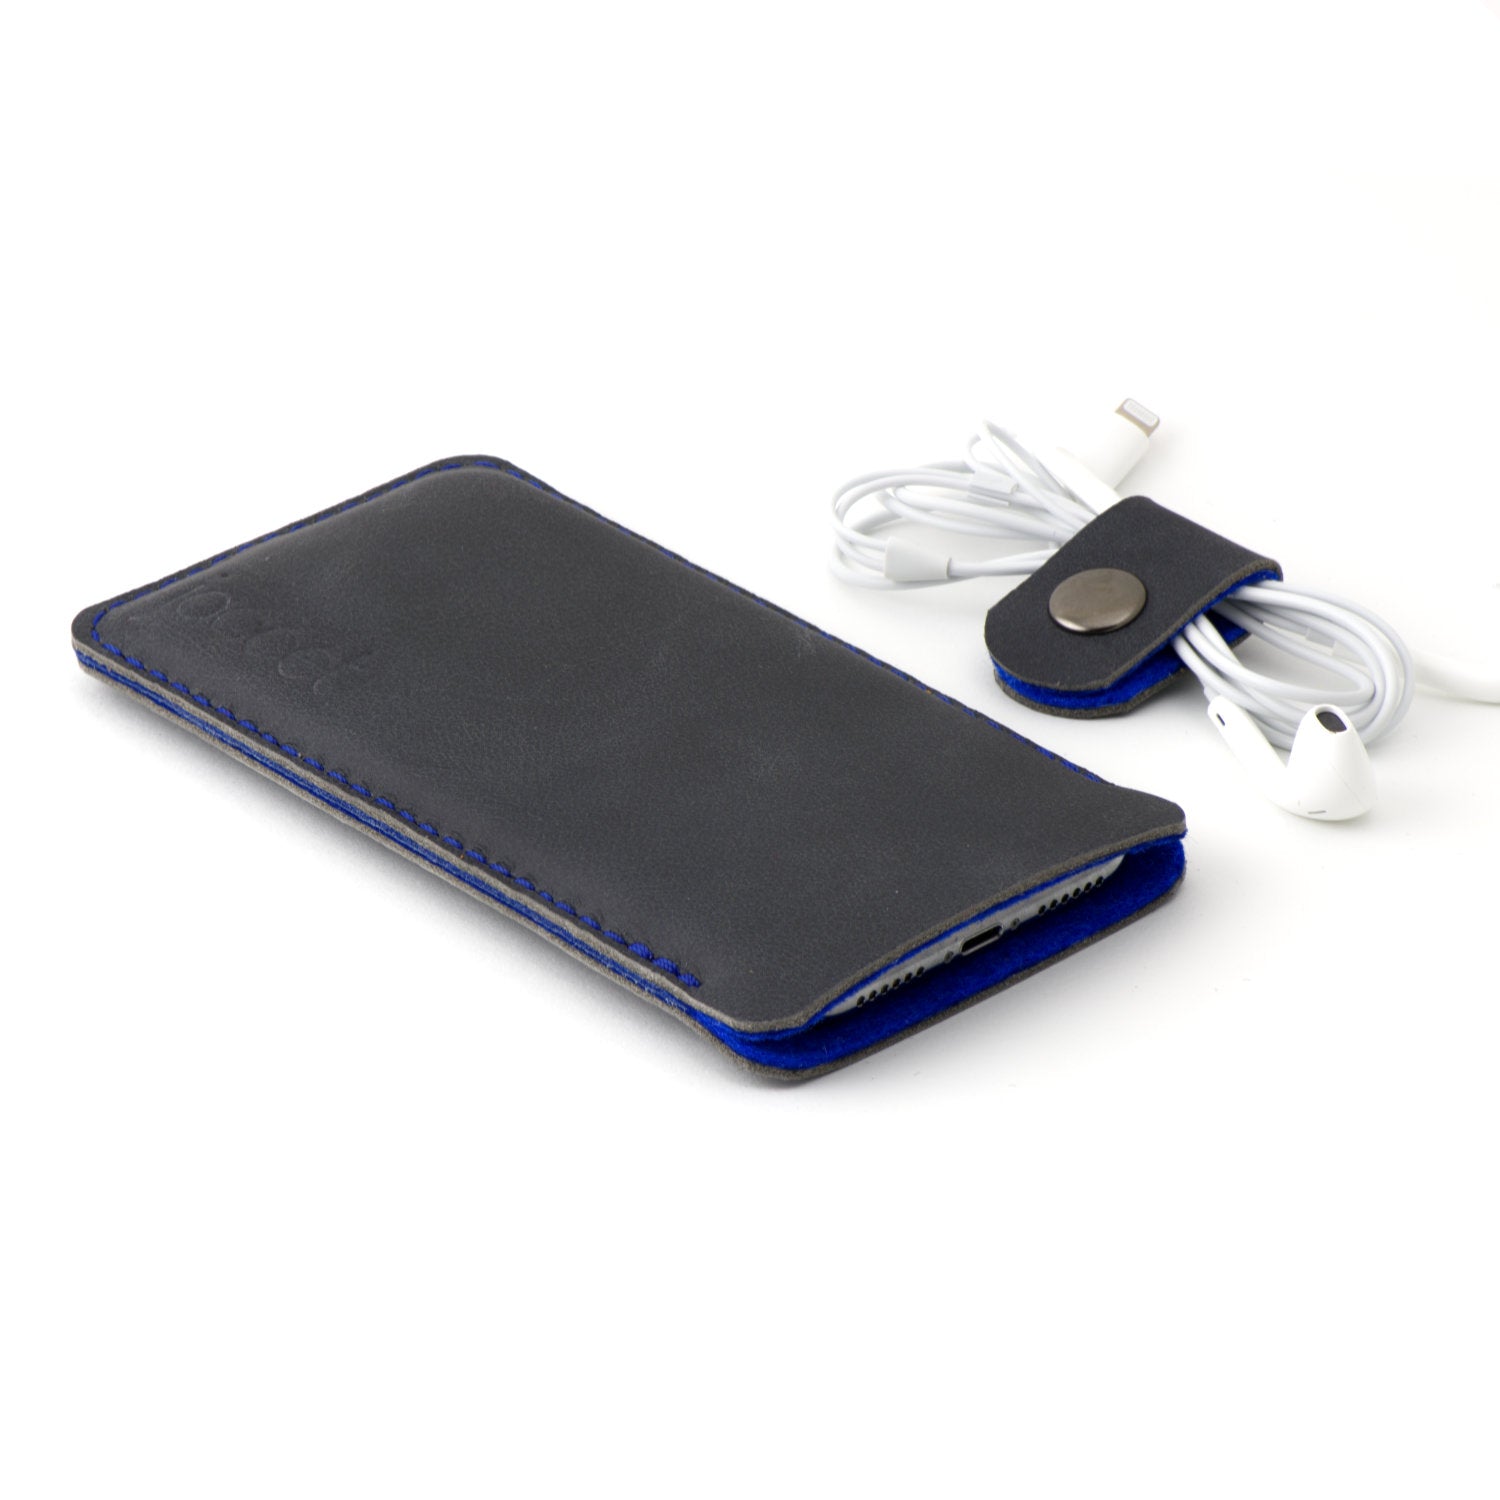 JACCET leather iPhone sleeve - anthracite/black leather with blue wool felt. 100% Handmade